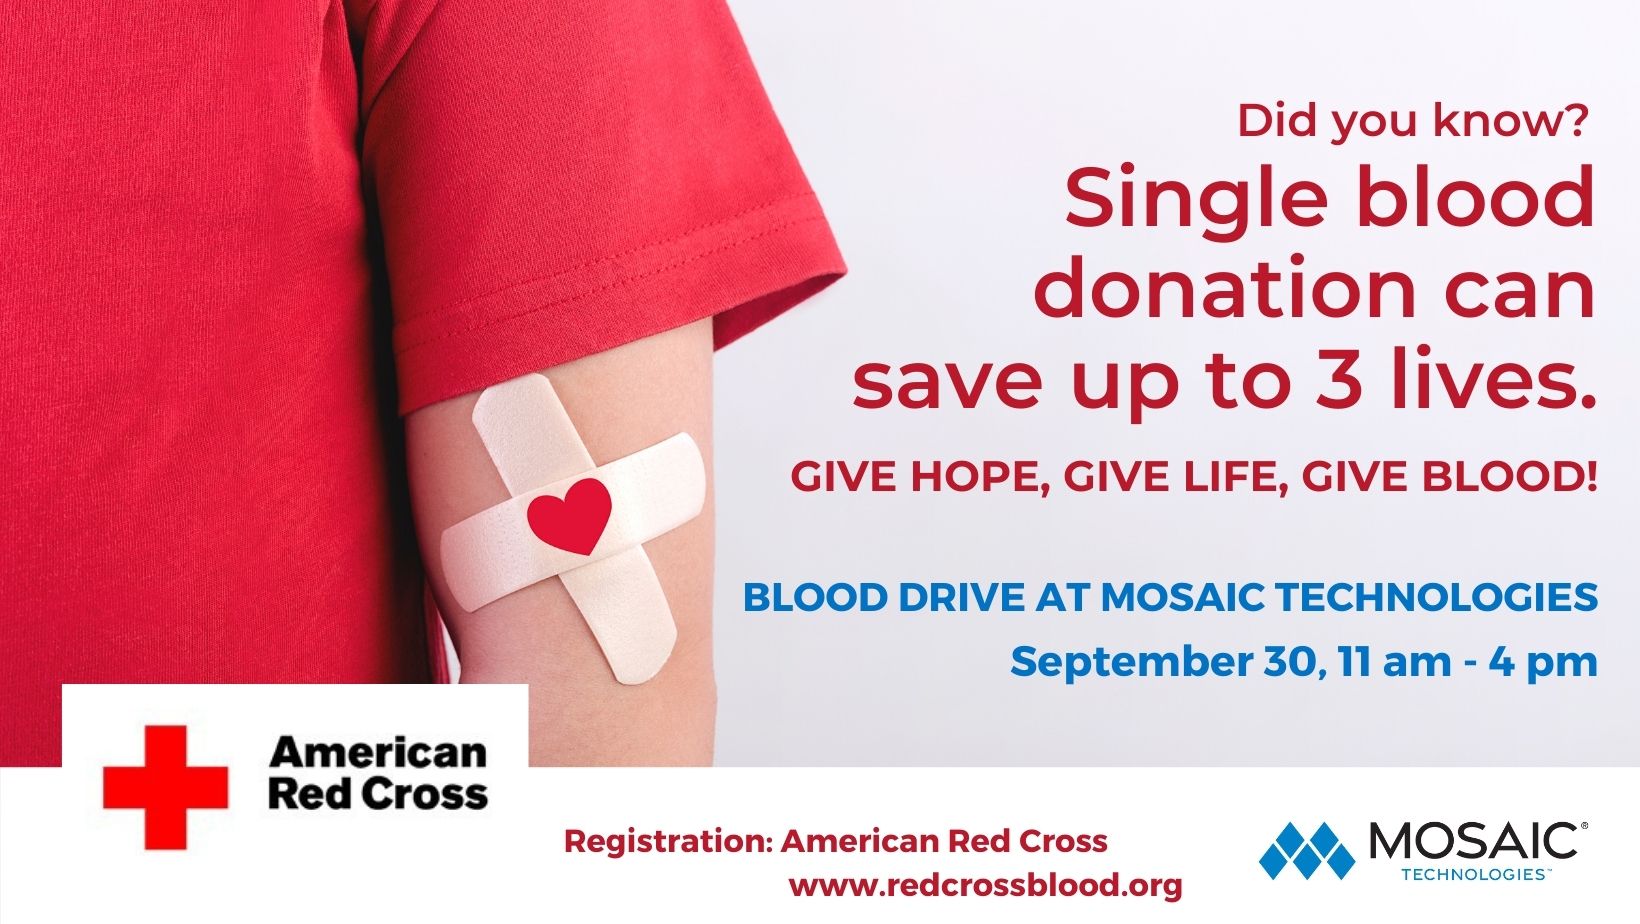 Red Cross blood drive at Mosaic Technologies in Cameron, Wi